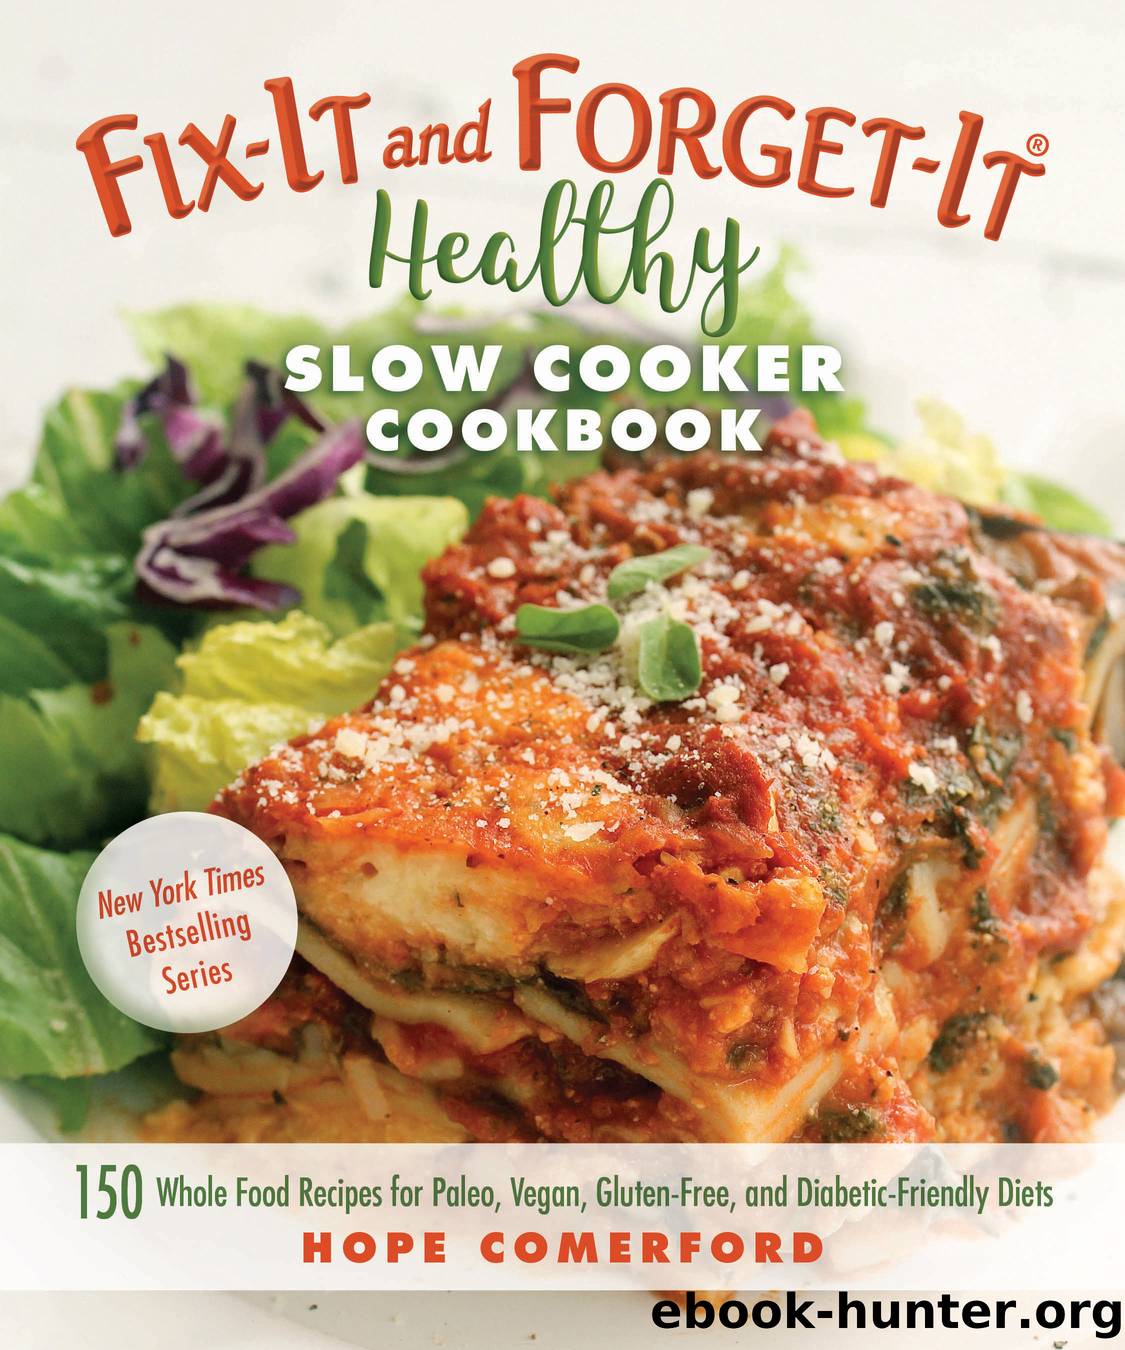 Fix-It and Forget-It Healthy Slow Cooker Cookbook by Hope Comerford